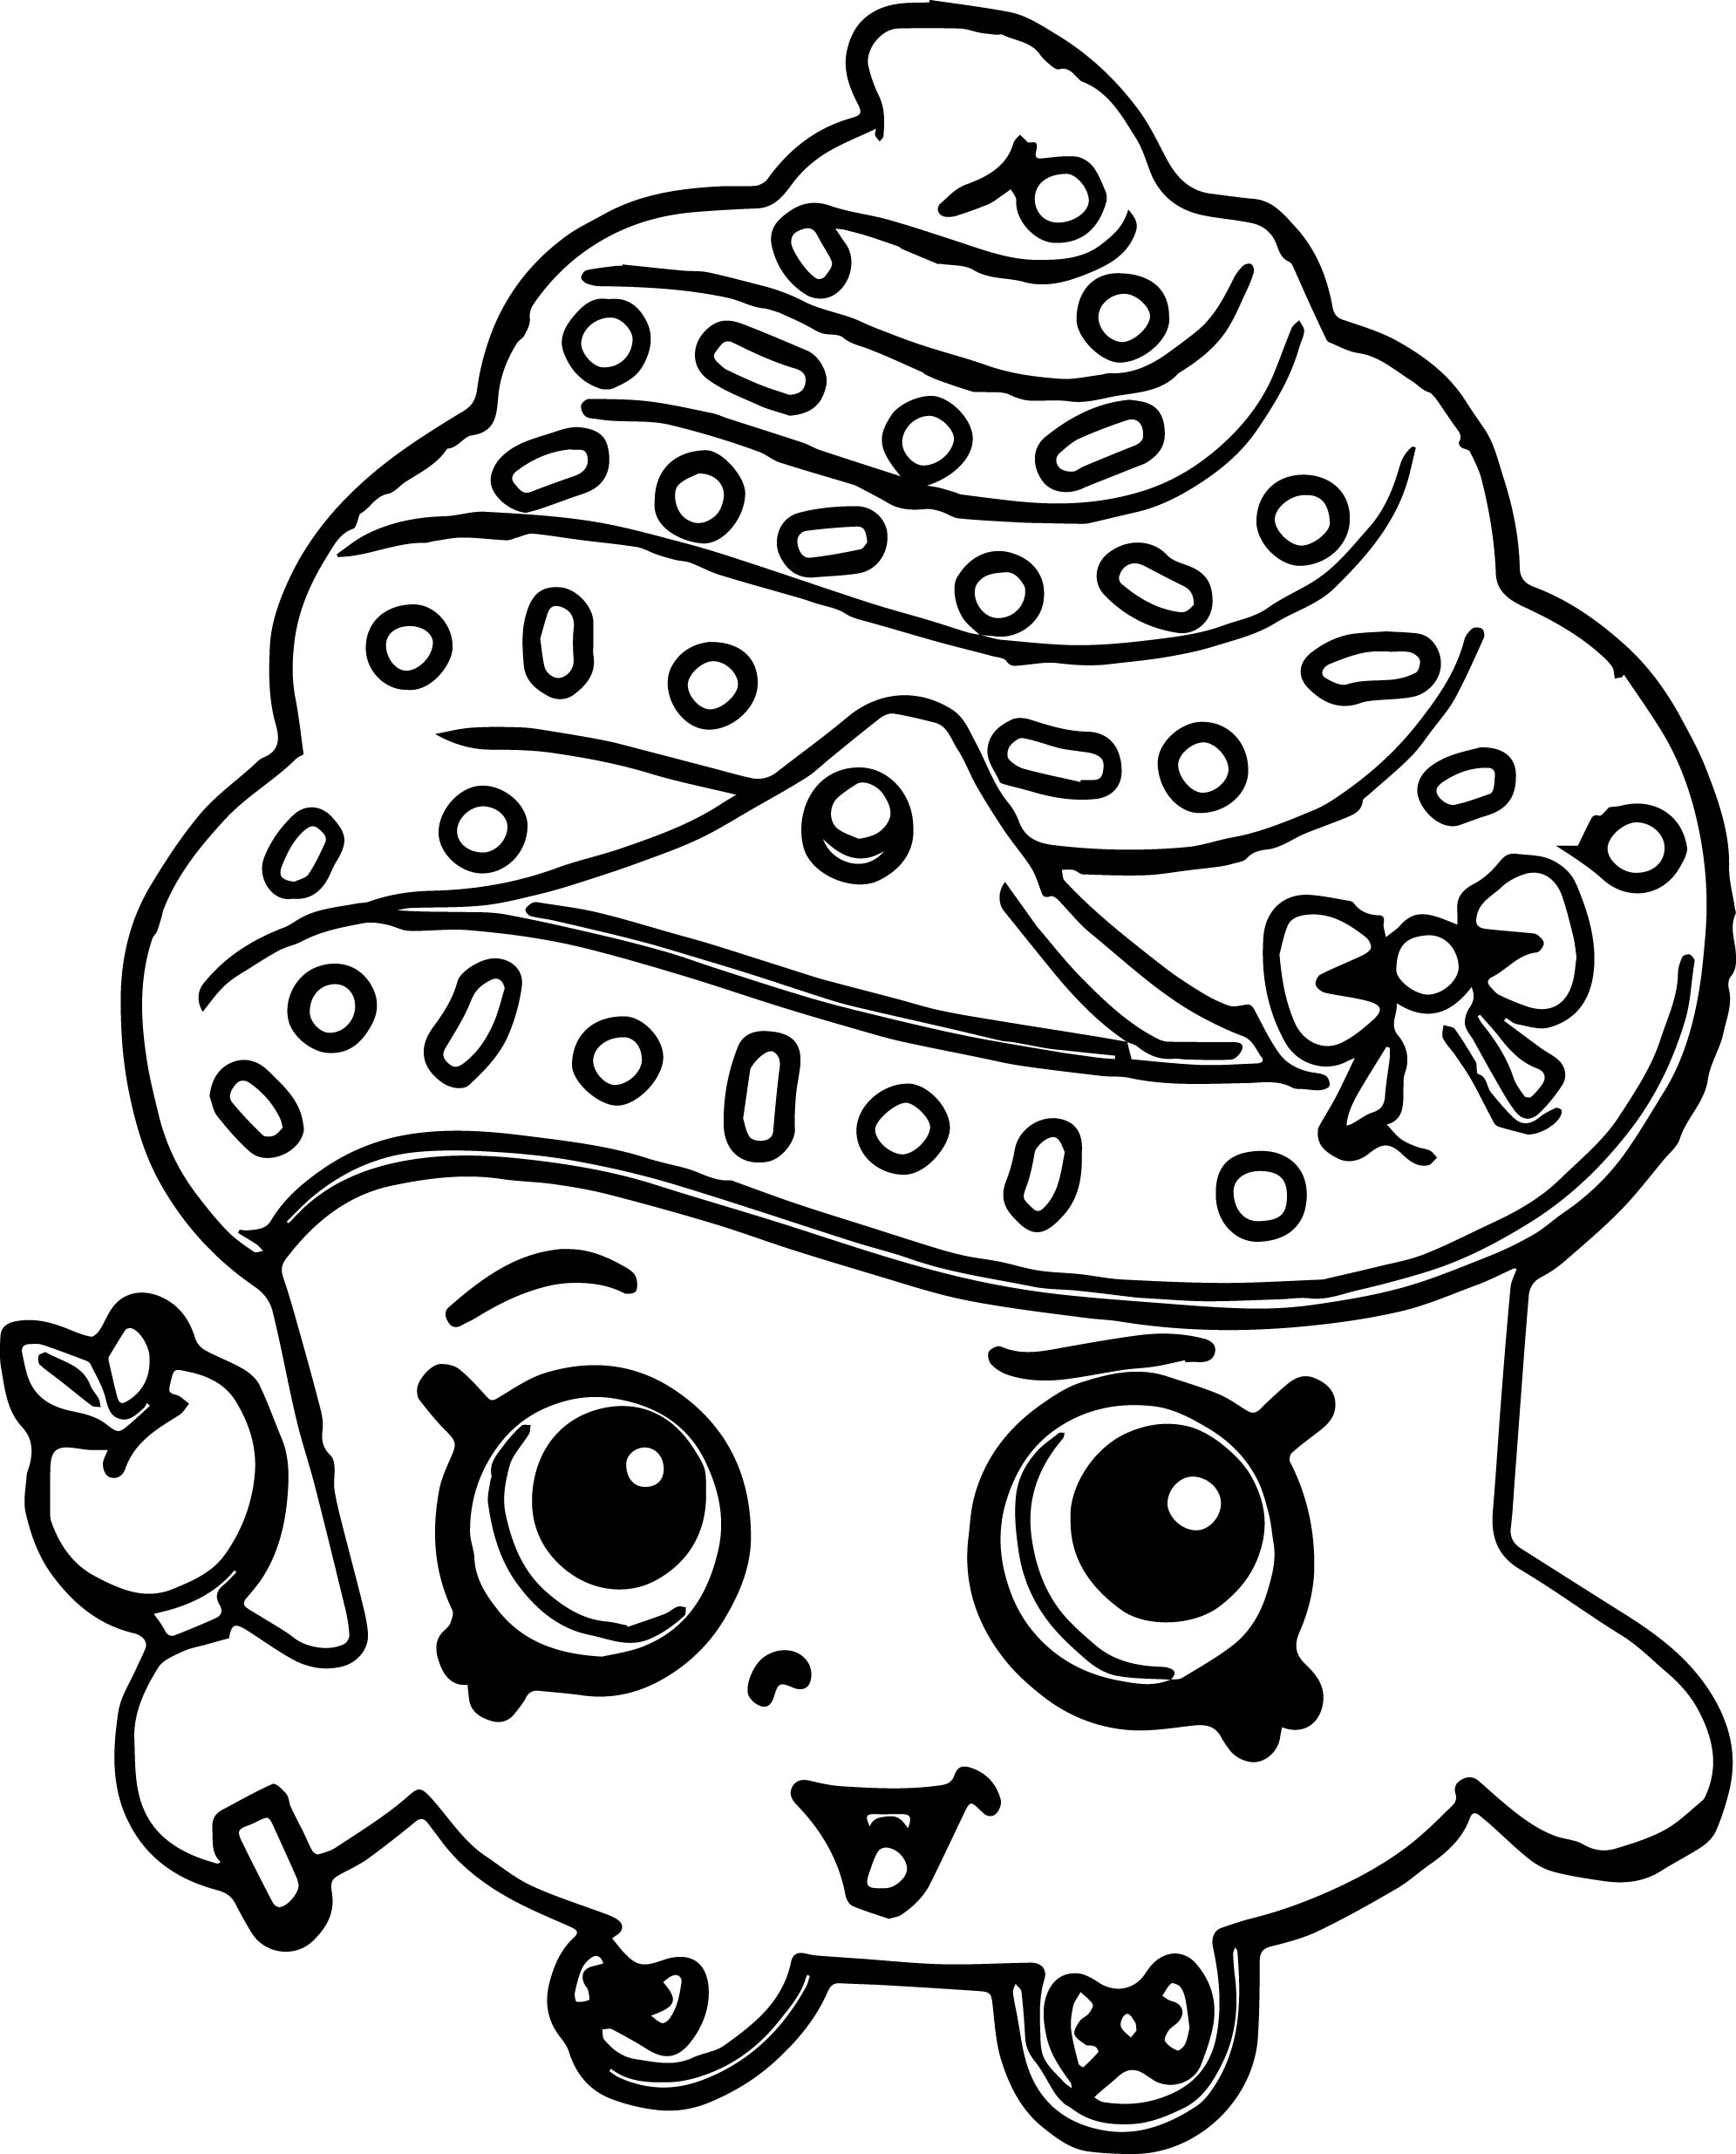 Shopkins Coloring Pages Cupcake Queen at GetColorings.com ...